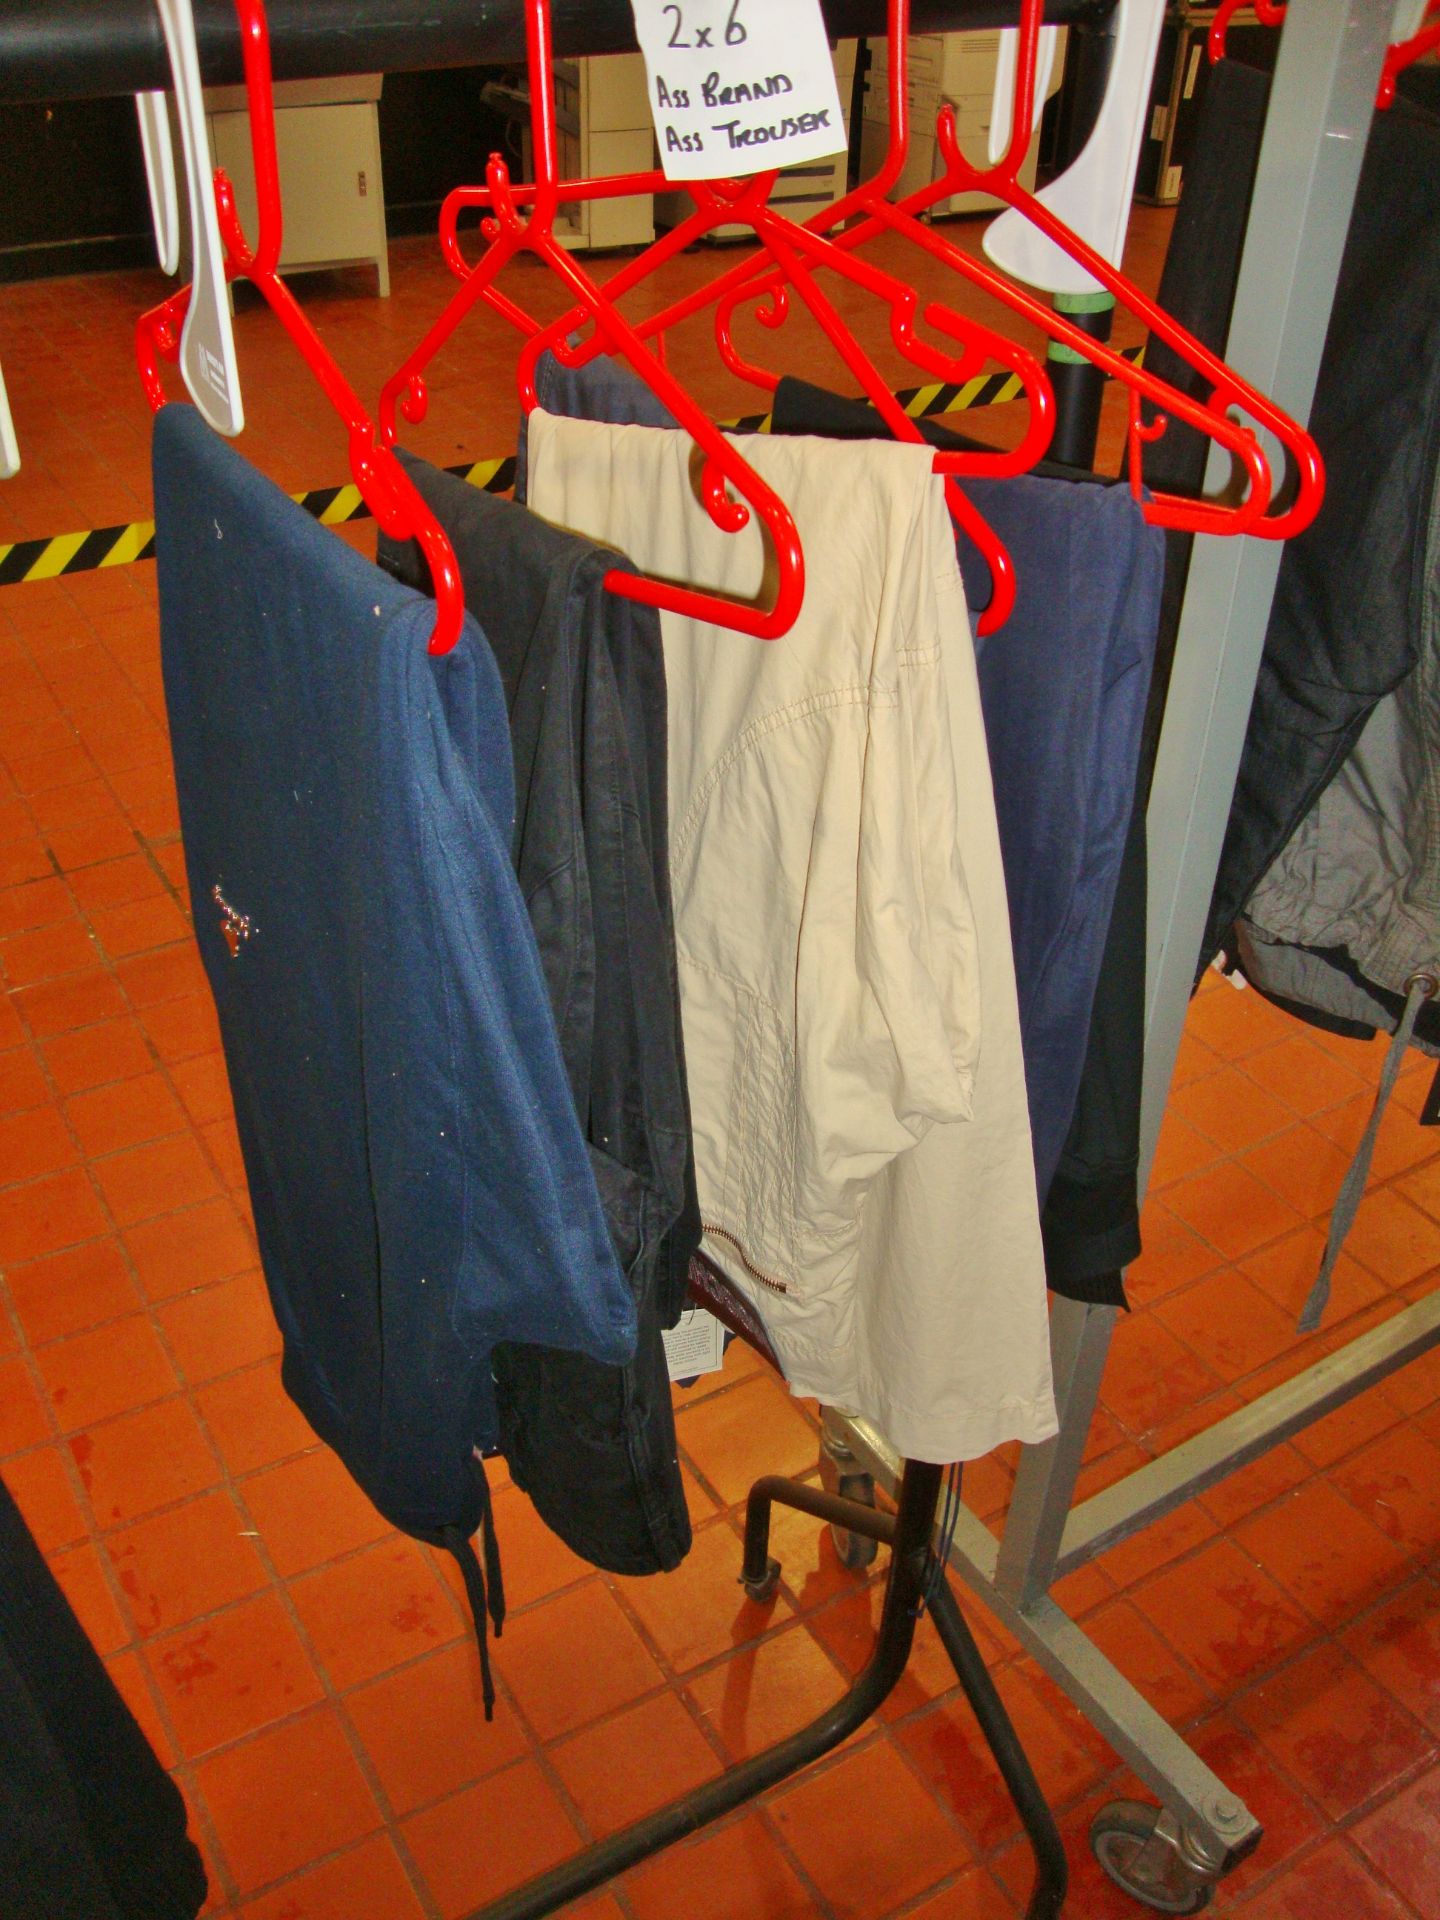 6 assorted pairs of trousers and pants by assorted brands including Moschino, Stone Island, etc